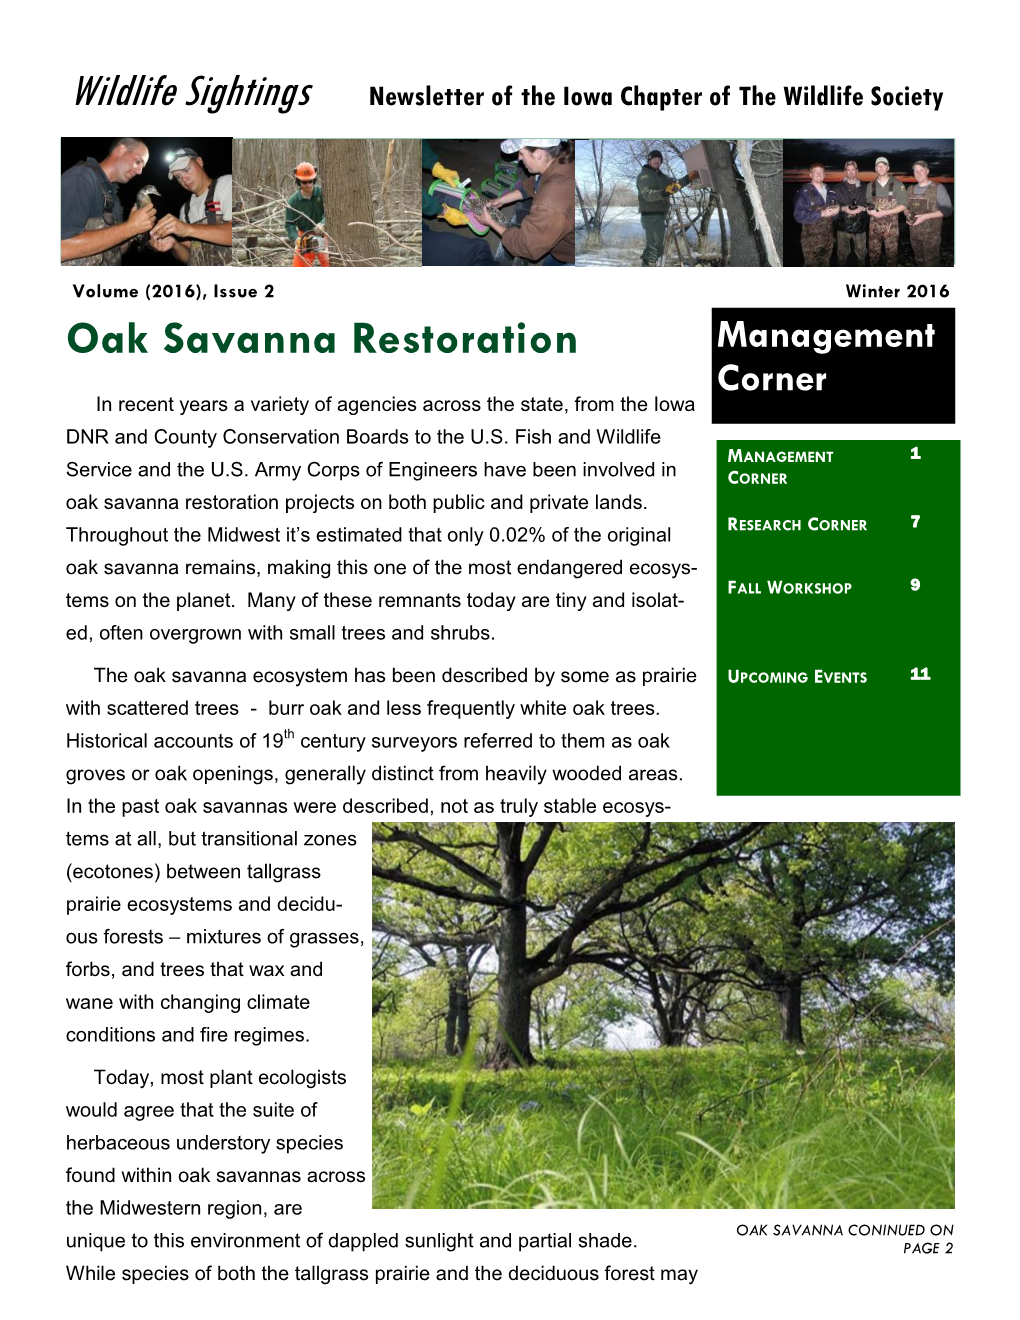 Oak Savanna Restoration Management Corner in Recent Years a Variety of Agencies Across the State, from the Iowa DNR and County Conservation Boards to the U.S